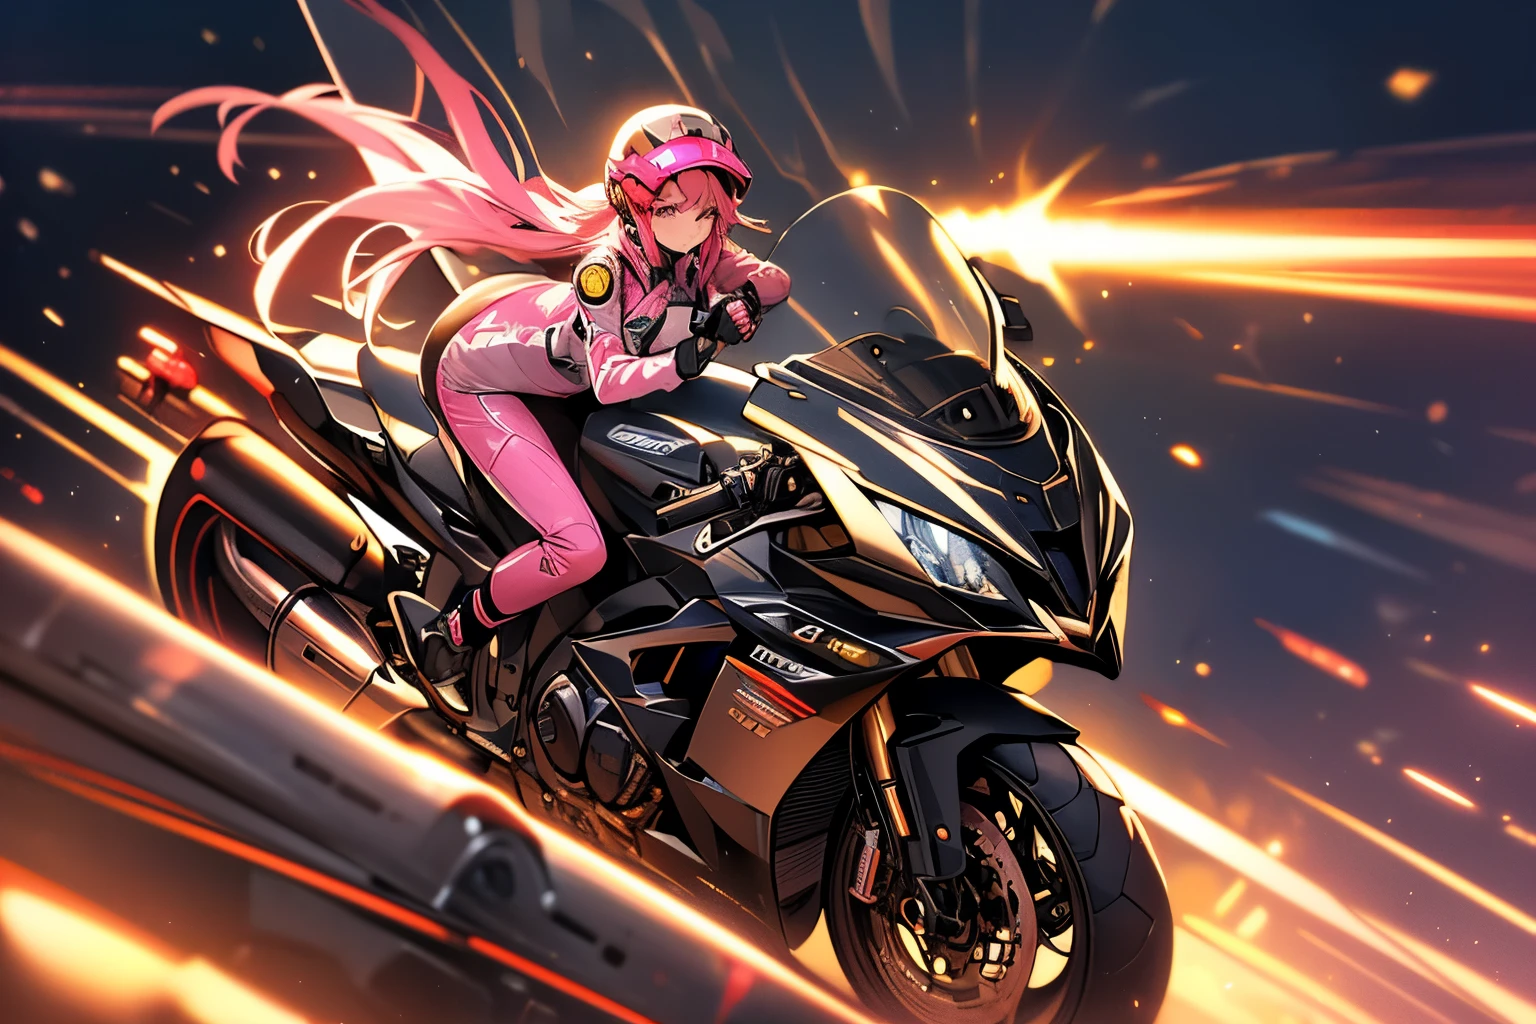 Highest image quality, outstanding details, ultra-high resolution, (realism: 1.4), the best illustration, favor details, highly condensed 1girl, with a delicate and beautiful face, wearing a pink mech, wearing a mecha helmet, holding a direction controller, riding on a motorcycle, the background is a high-tech lighting scene of the future city.